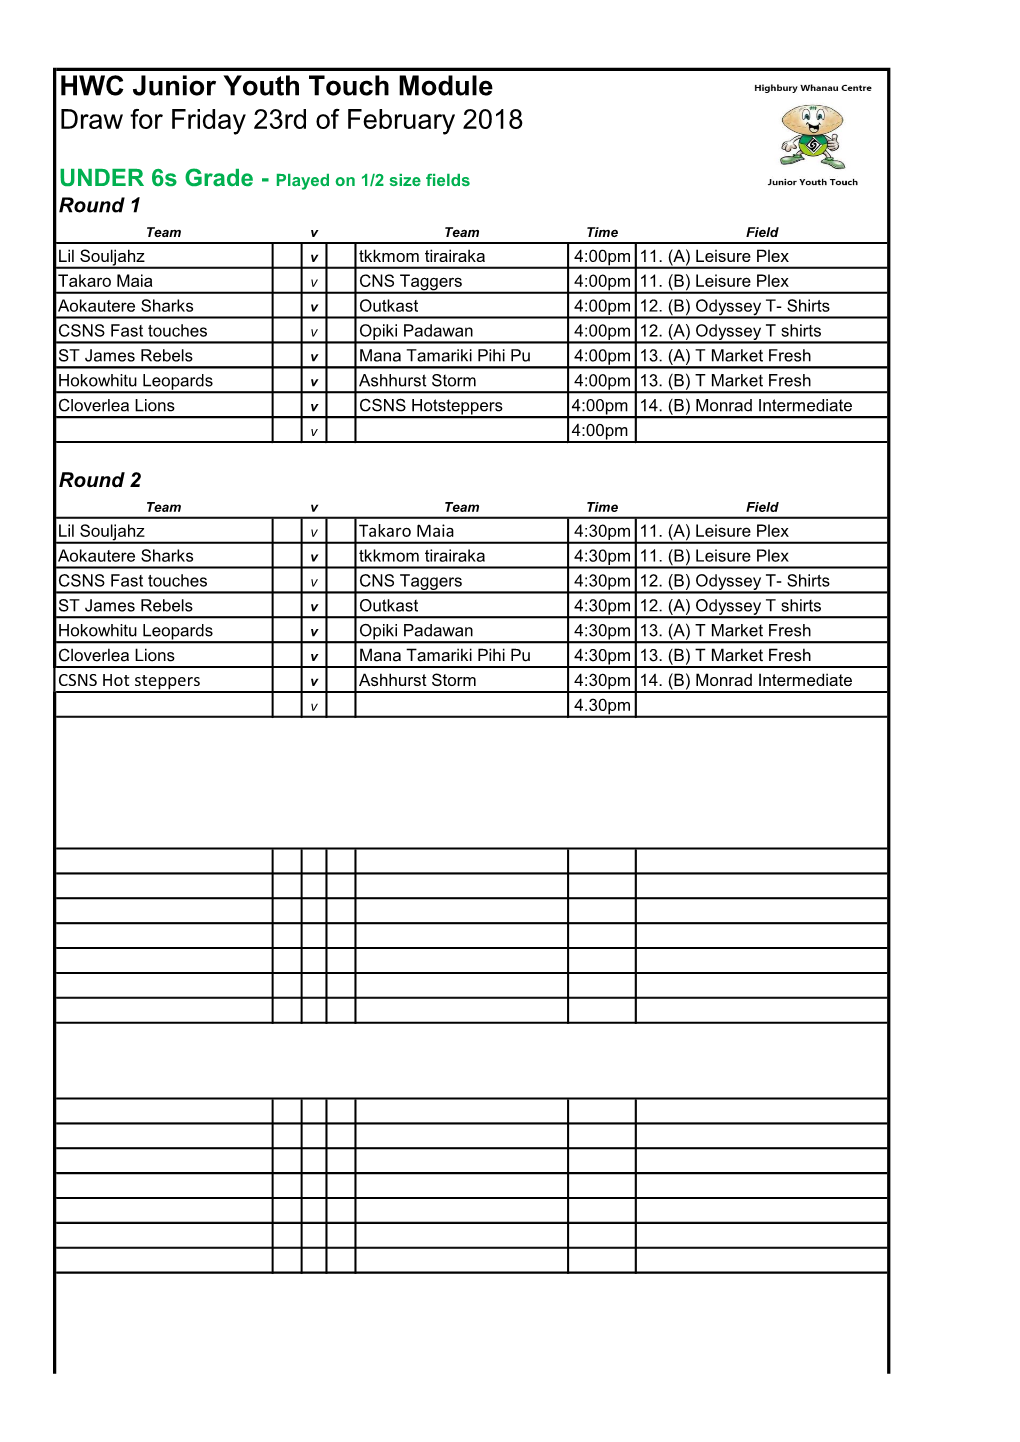 HWC Junior Youth Touch Module Draw for Friday 23Rd of February 2018